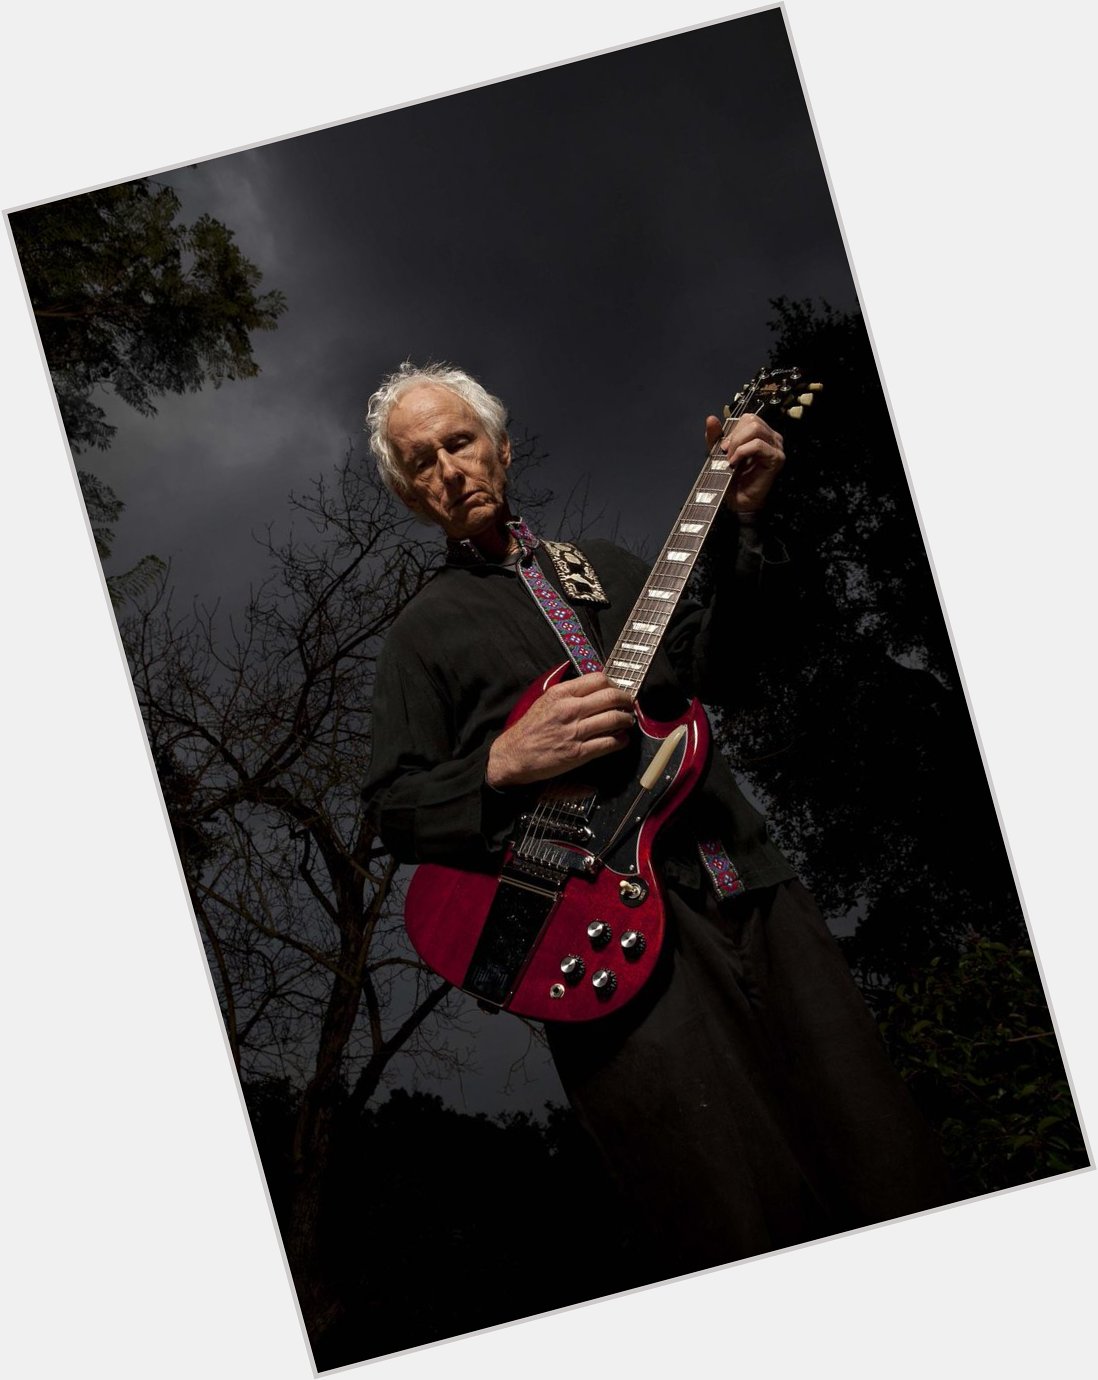 Happy Birthday to Robby Krieger as today he turns 69, I find the way he plays guitar truly inspiring. 